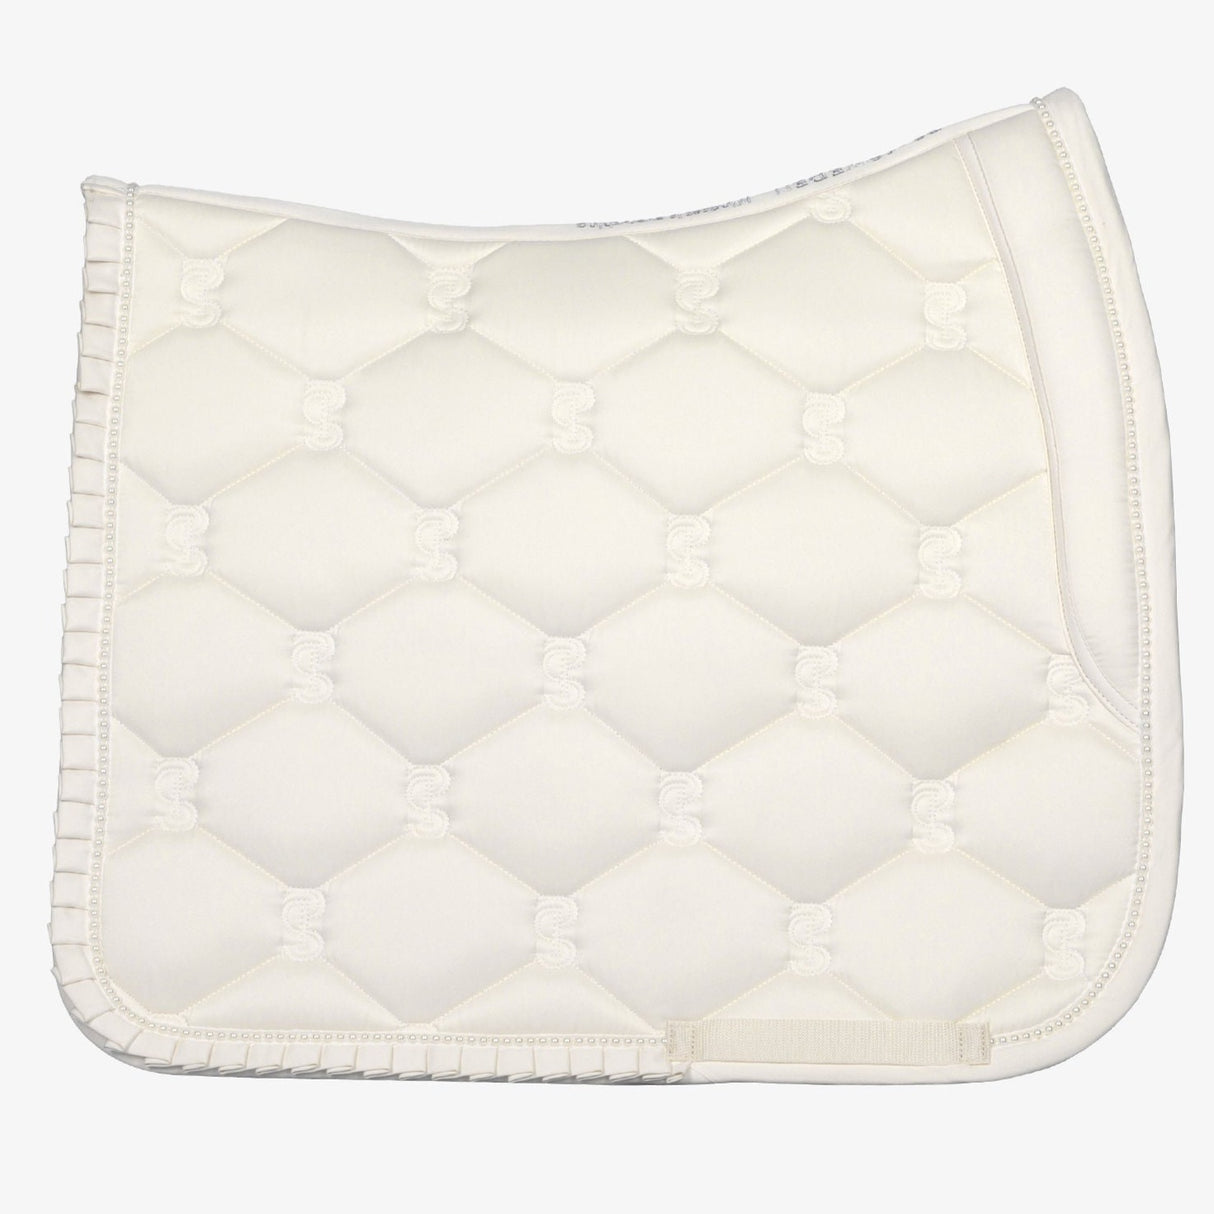 PS of Sweden Off White Ruffle Pearl Dressage Saddle Pad